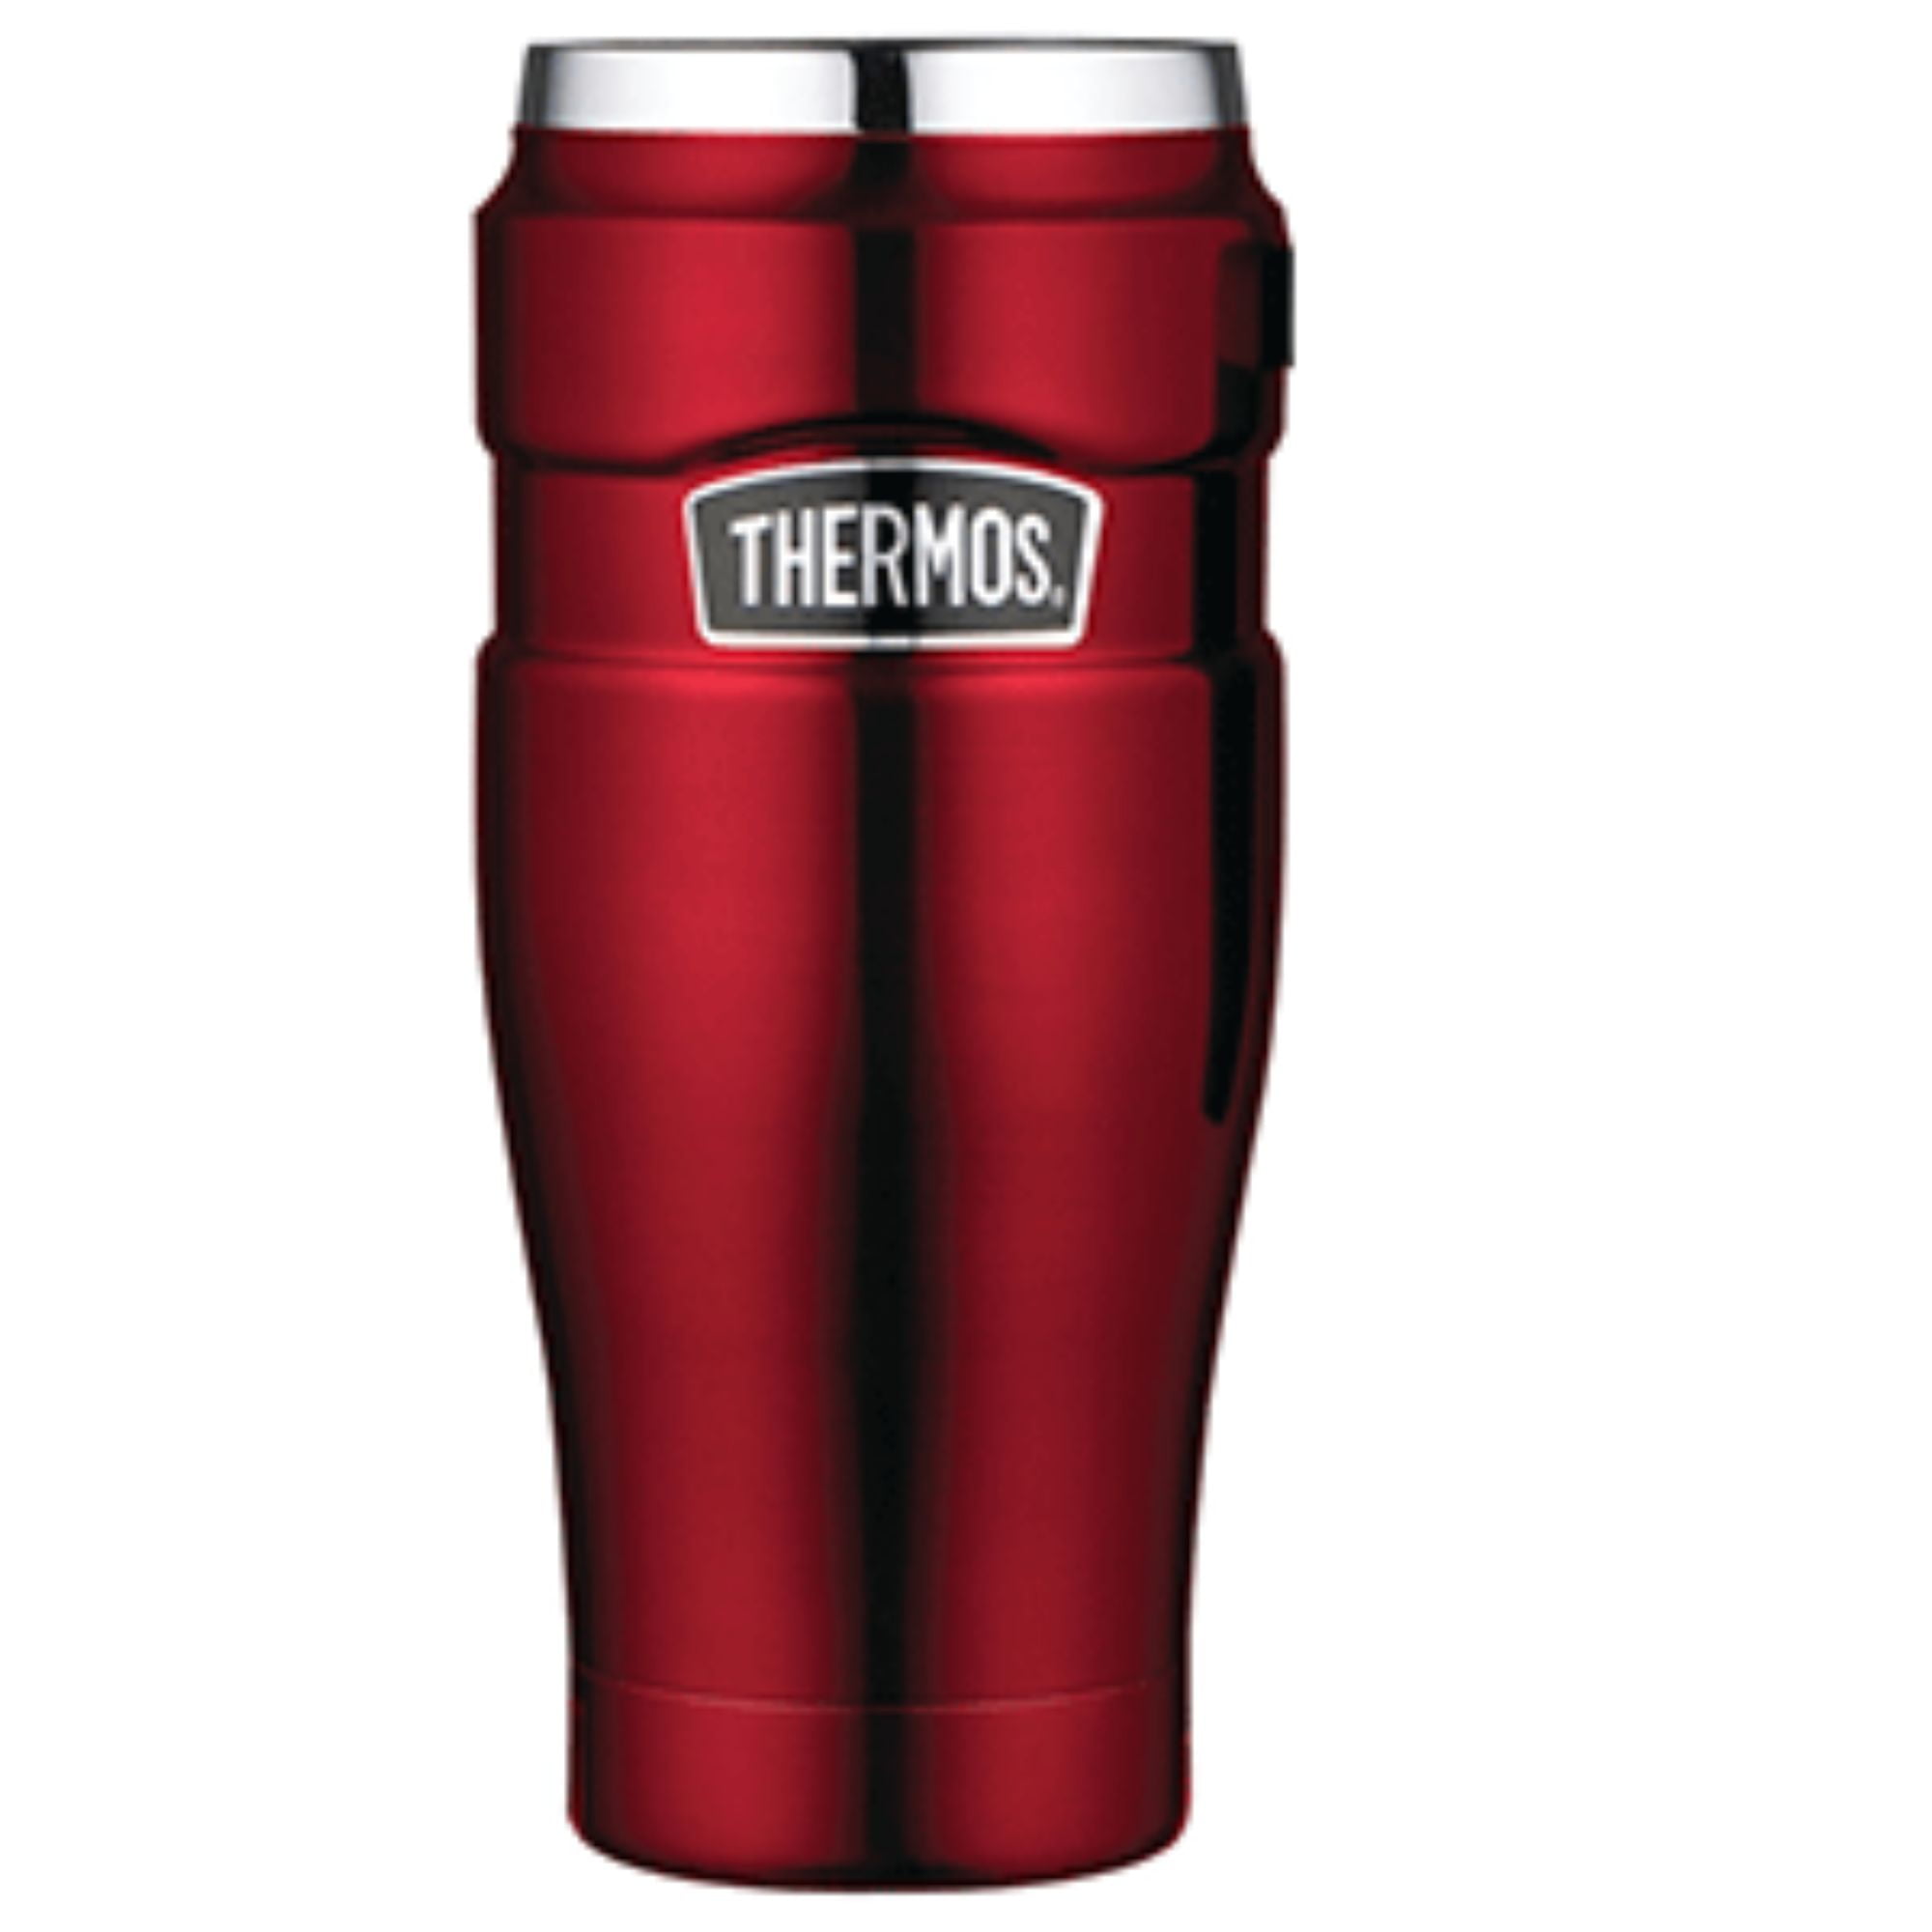 Stainless King Insulated Tumbler 2-Pack Cranberry/Midnight Blue Thermos 16 oz 